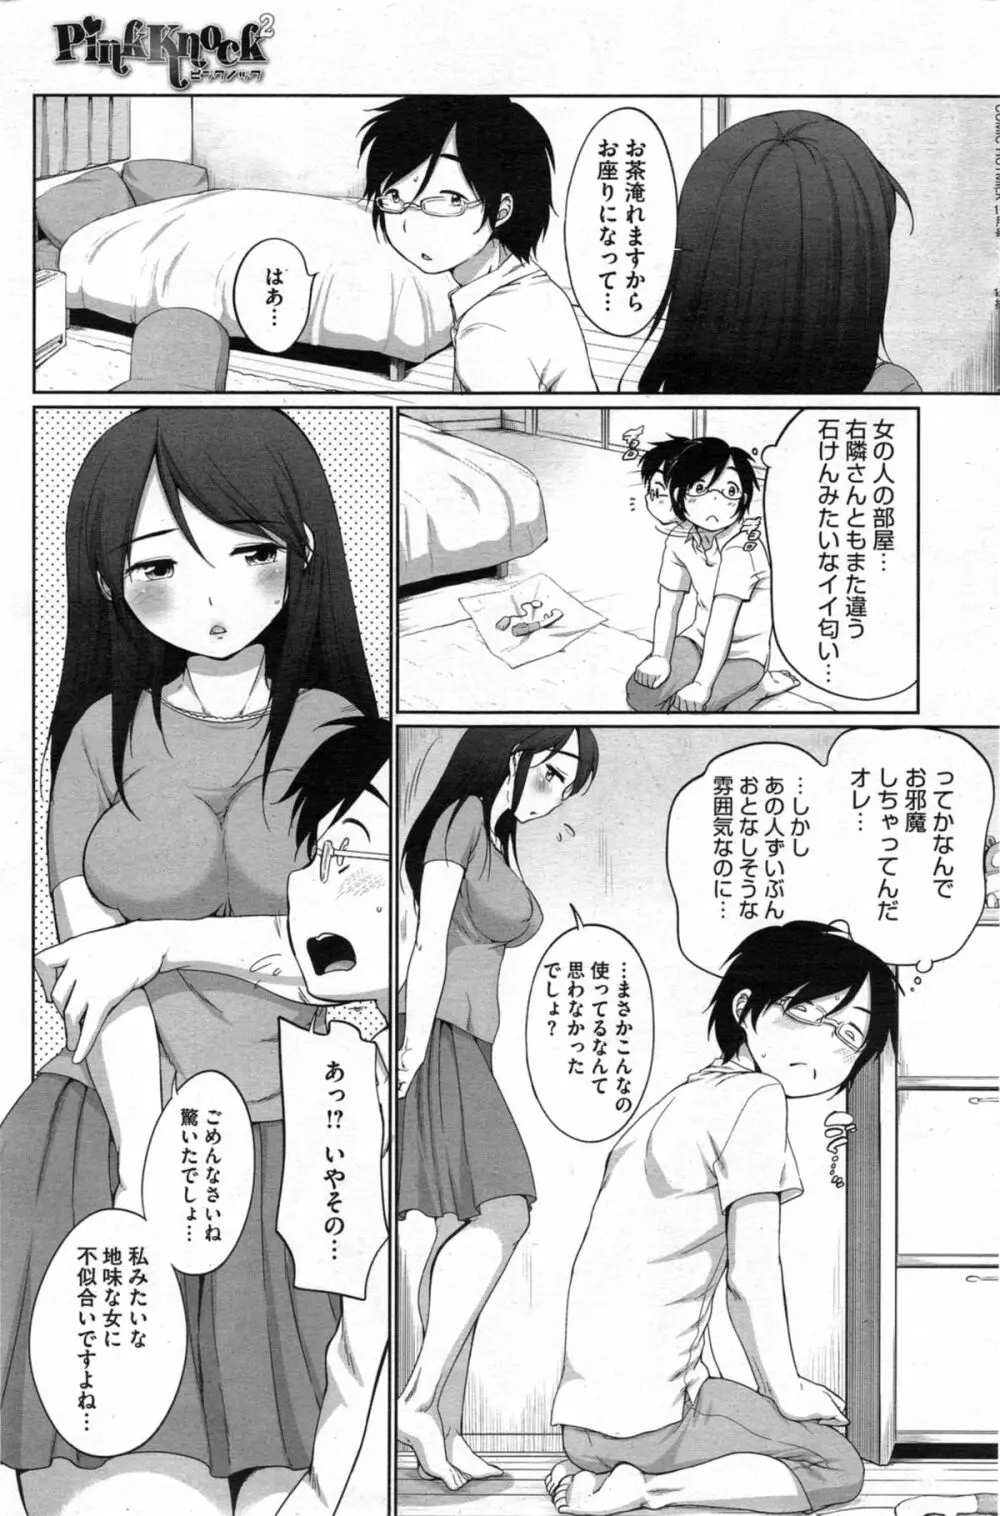 PinkKnock 第1-2章 Page.23